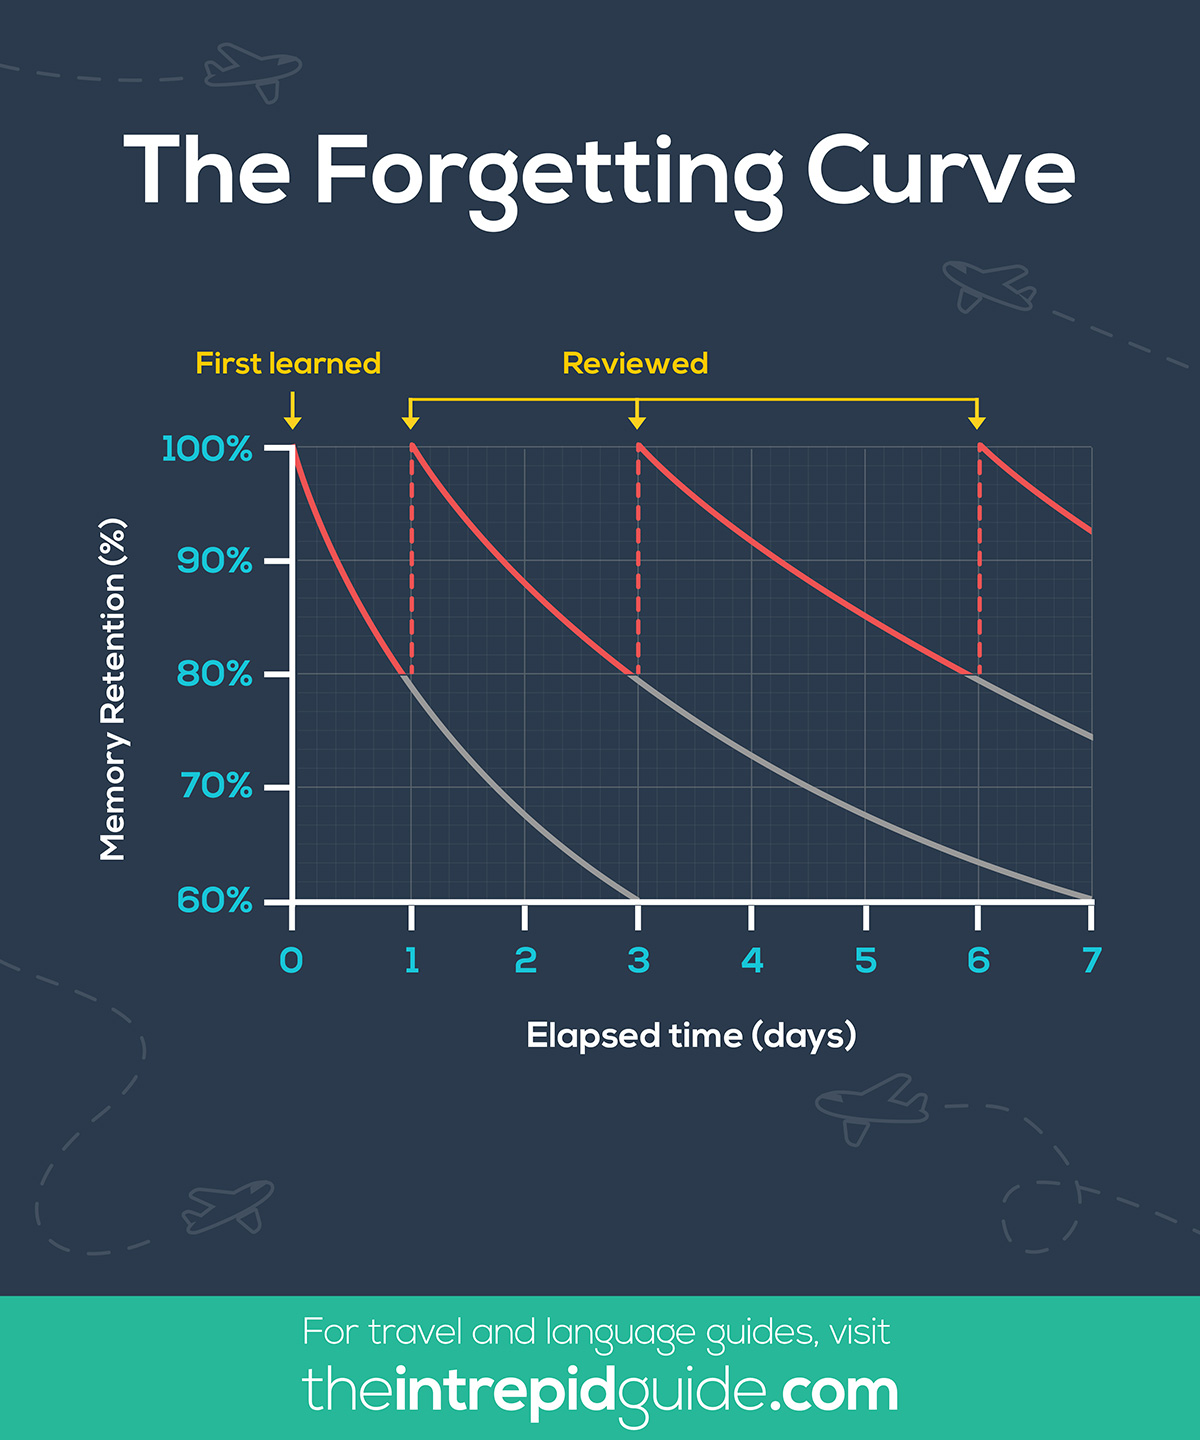 How to Memorize Vocabulary Tips - The Forgetting Curve by Ebbinghaus